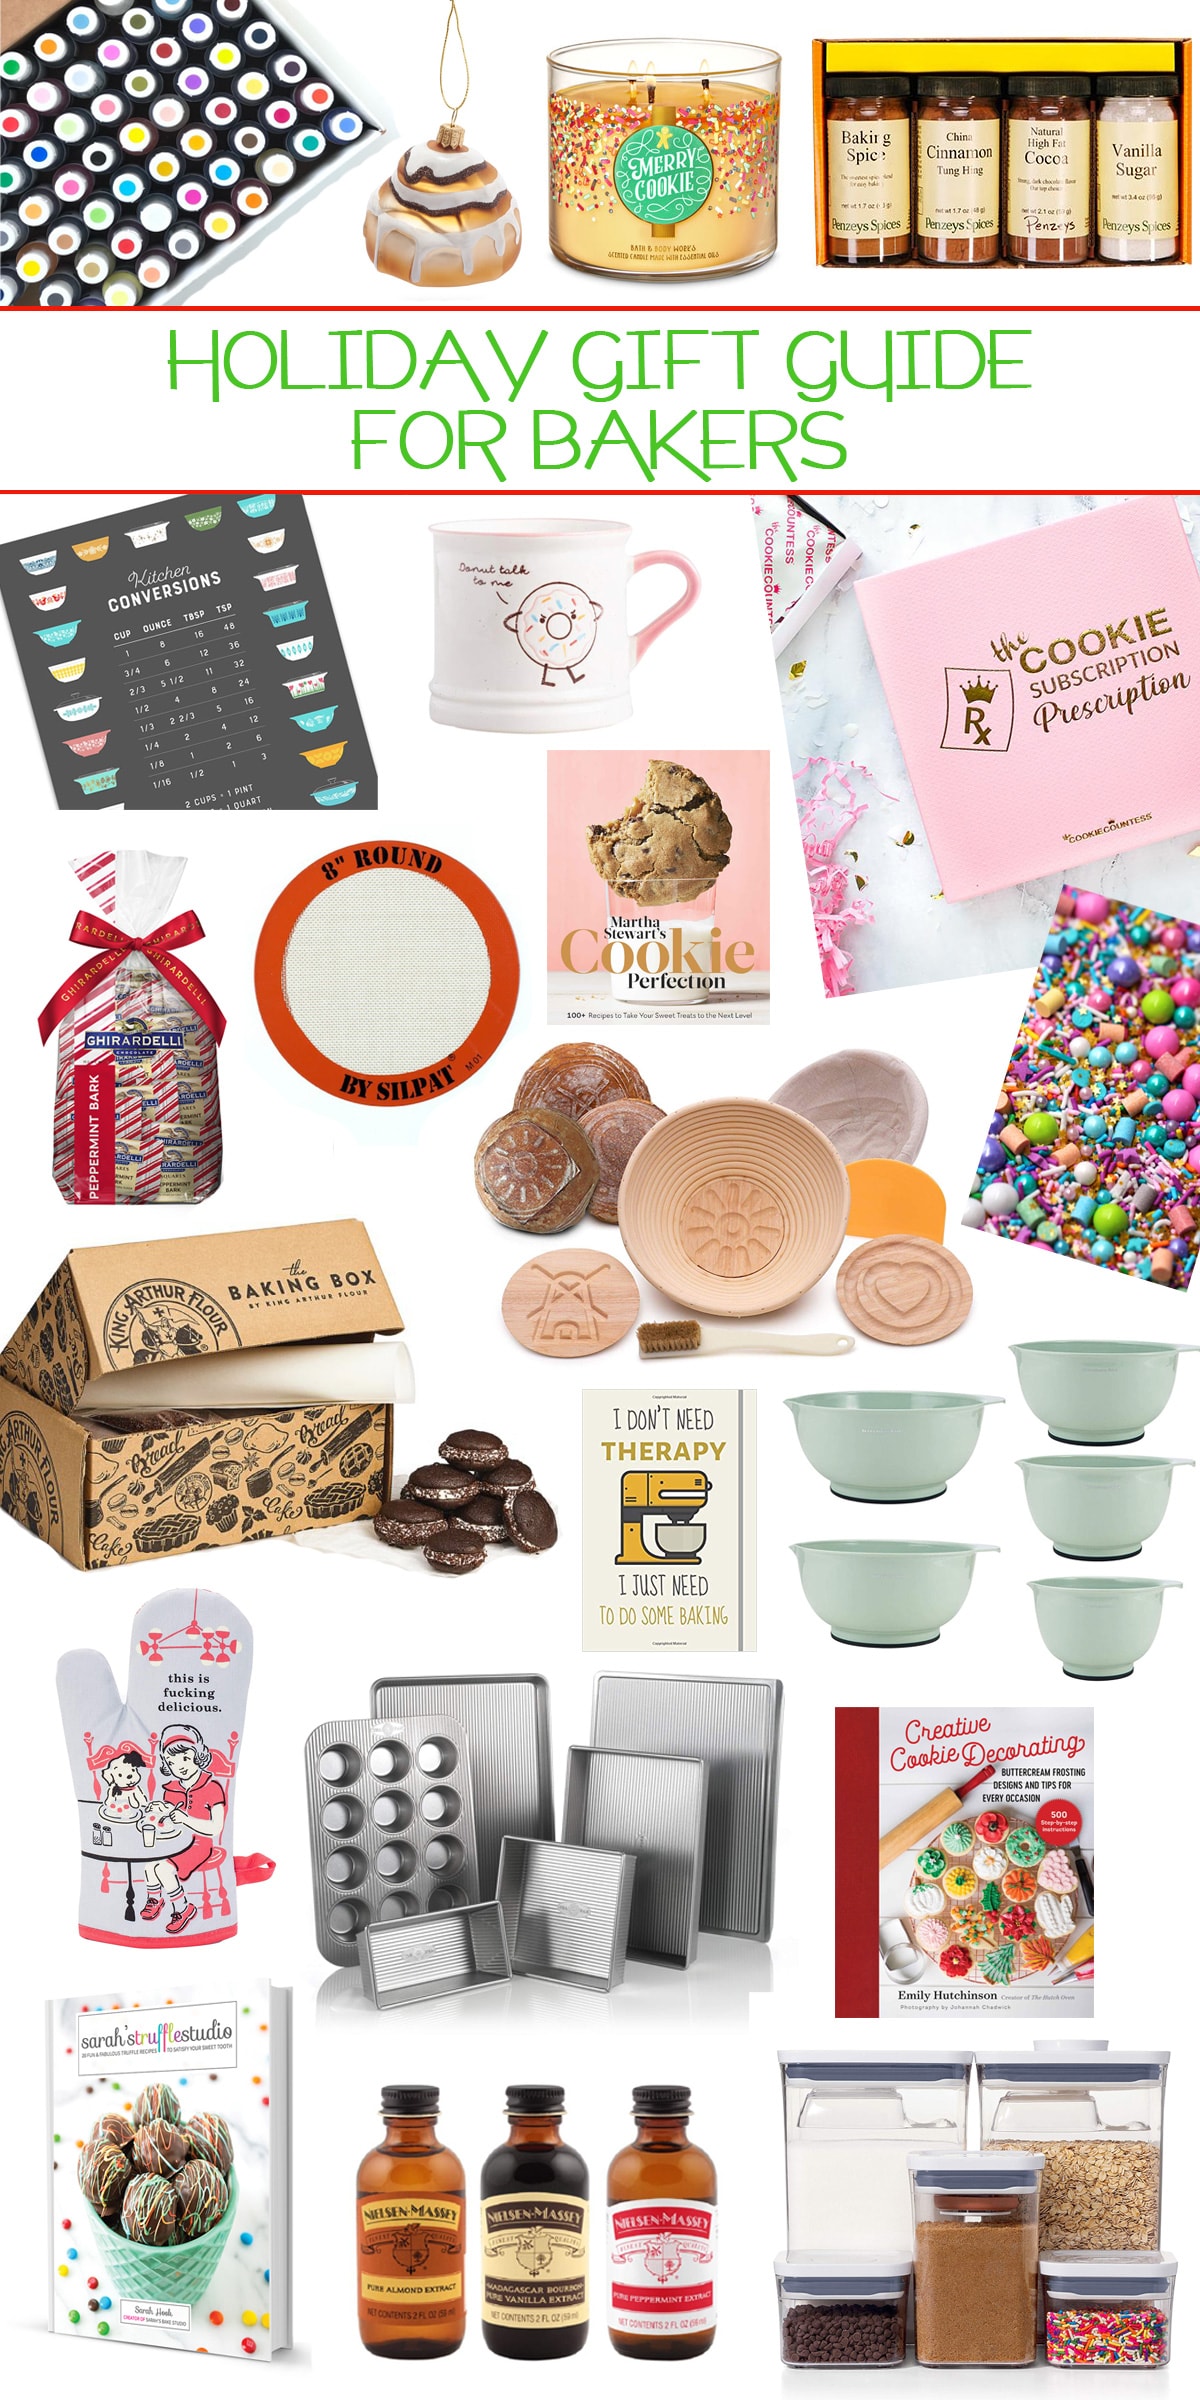 2019 Holiday Gift Guide For Bakers - a sweet holiday gift guide stocked with swoon-worthy gifts for bakers.